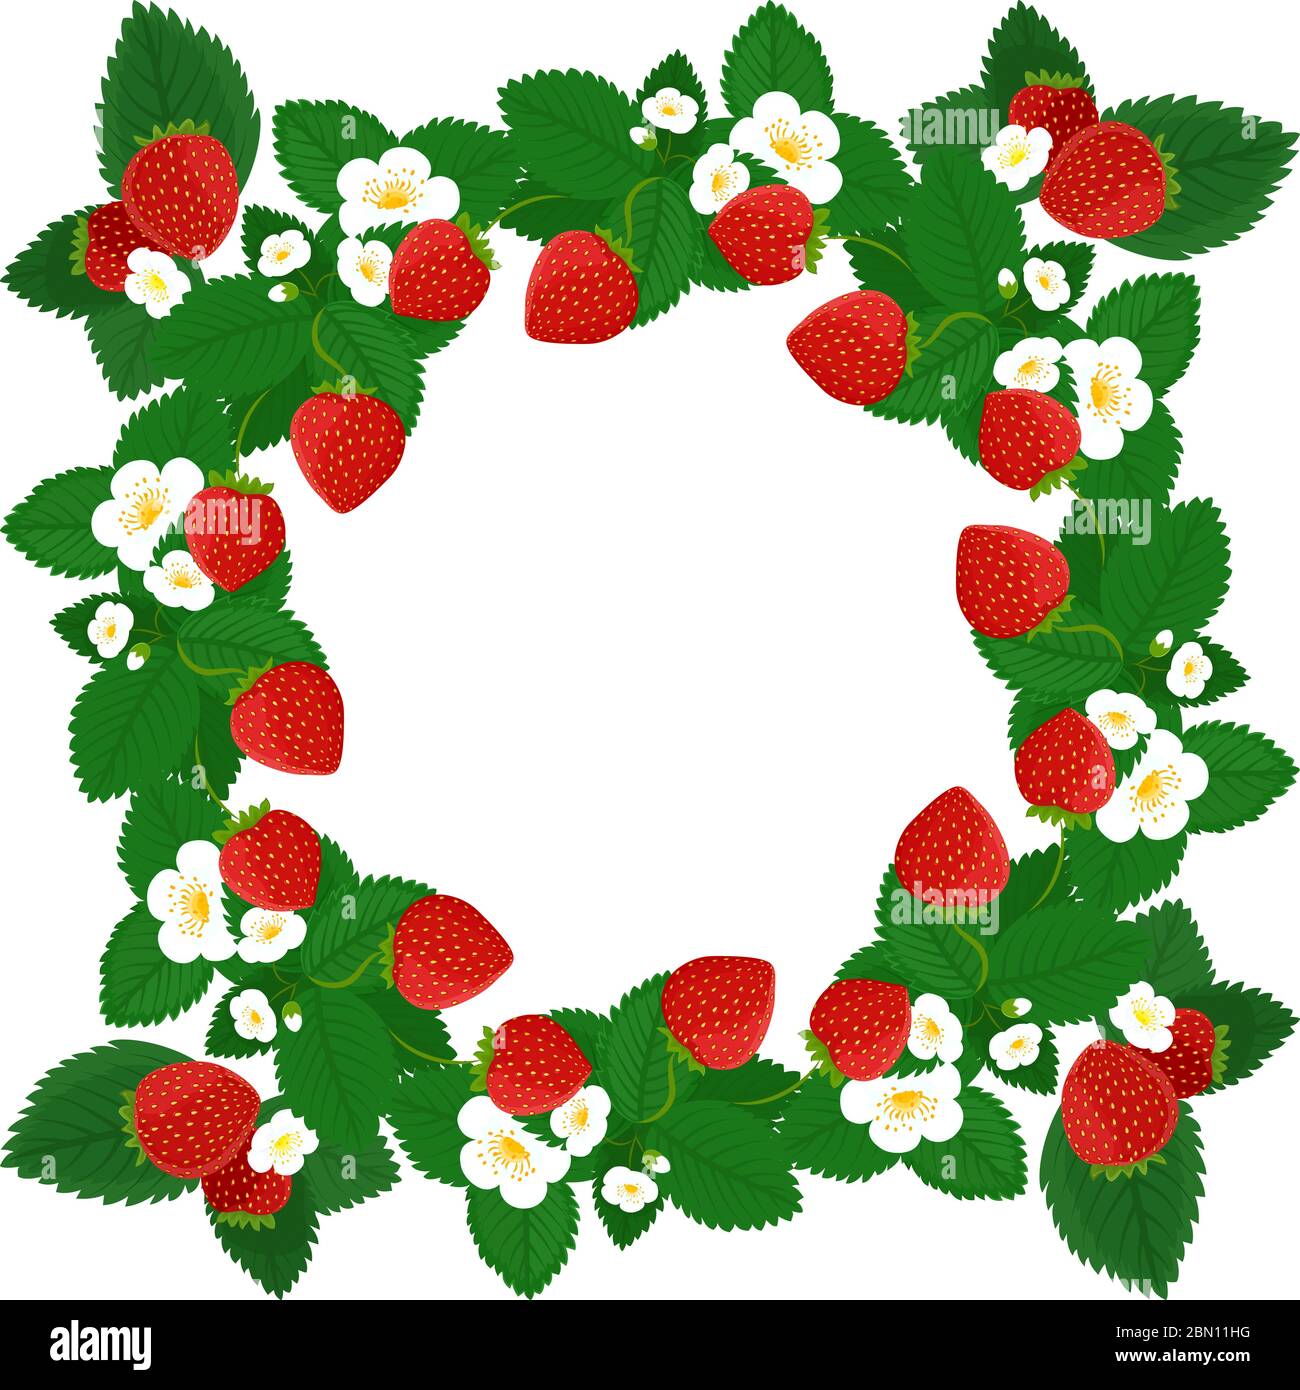 Frame design with strawberries, leaves and flowers isolated on white background. Strawberry vector frame, wreath design with copy space Stock Vector